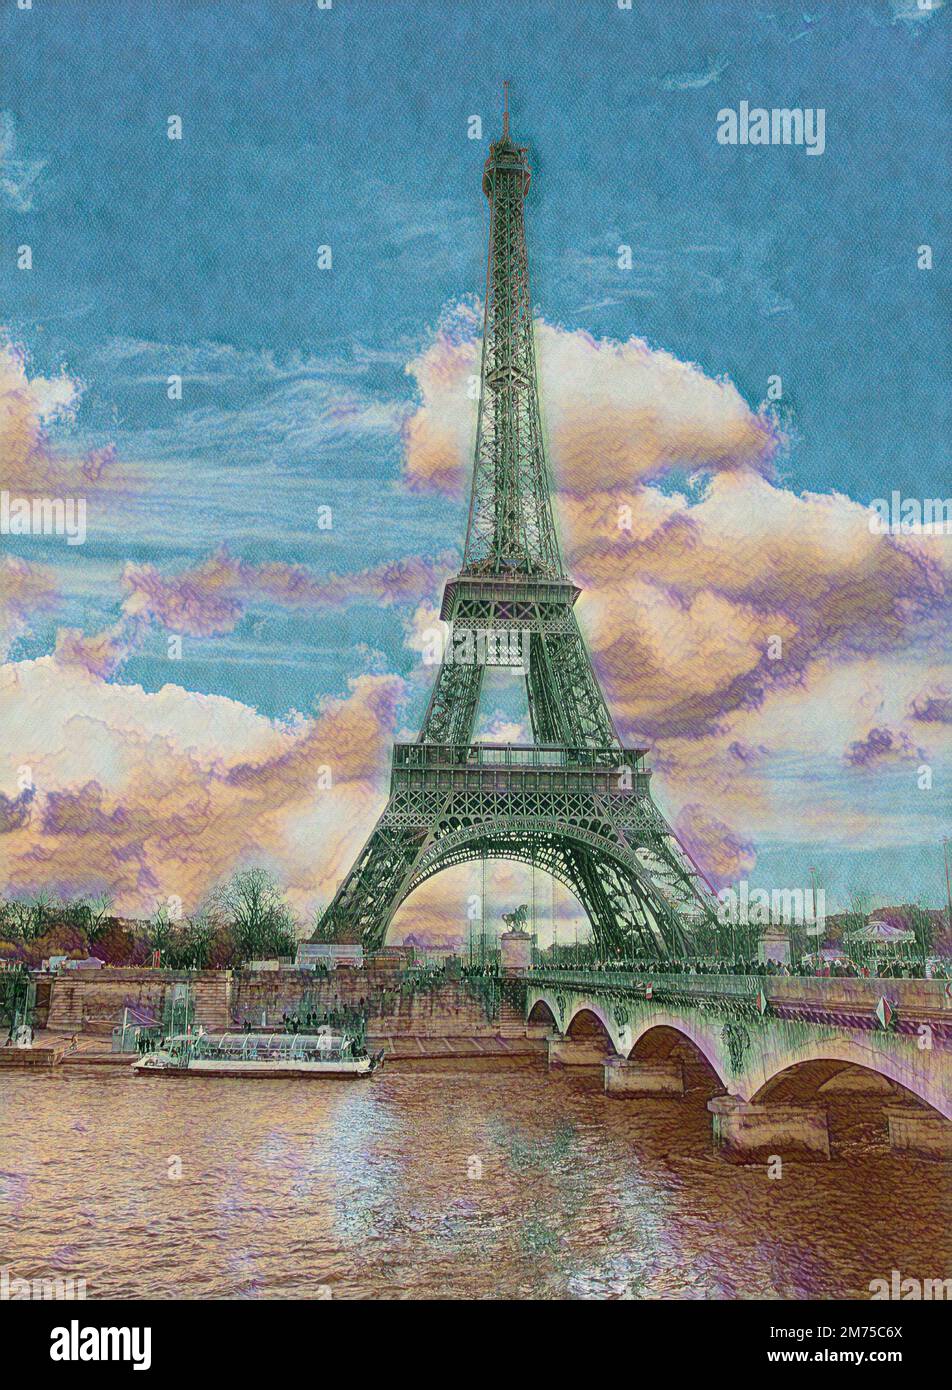 Digital watercolor painting effect of Eiffel Tower located in capital city of Paris, France with Seine River in forefront Stock Photo